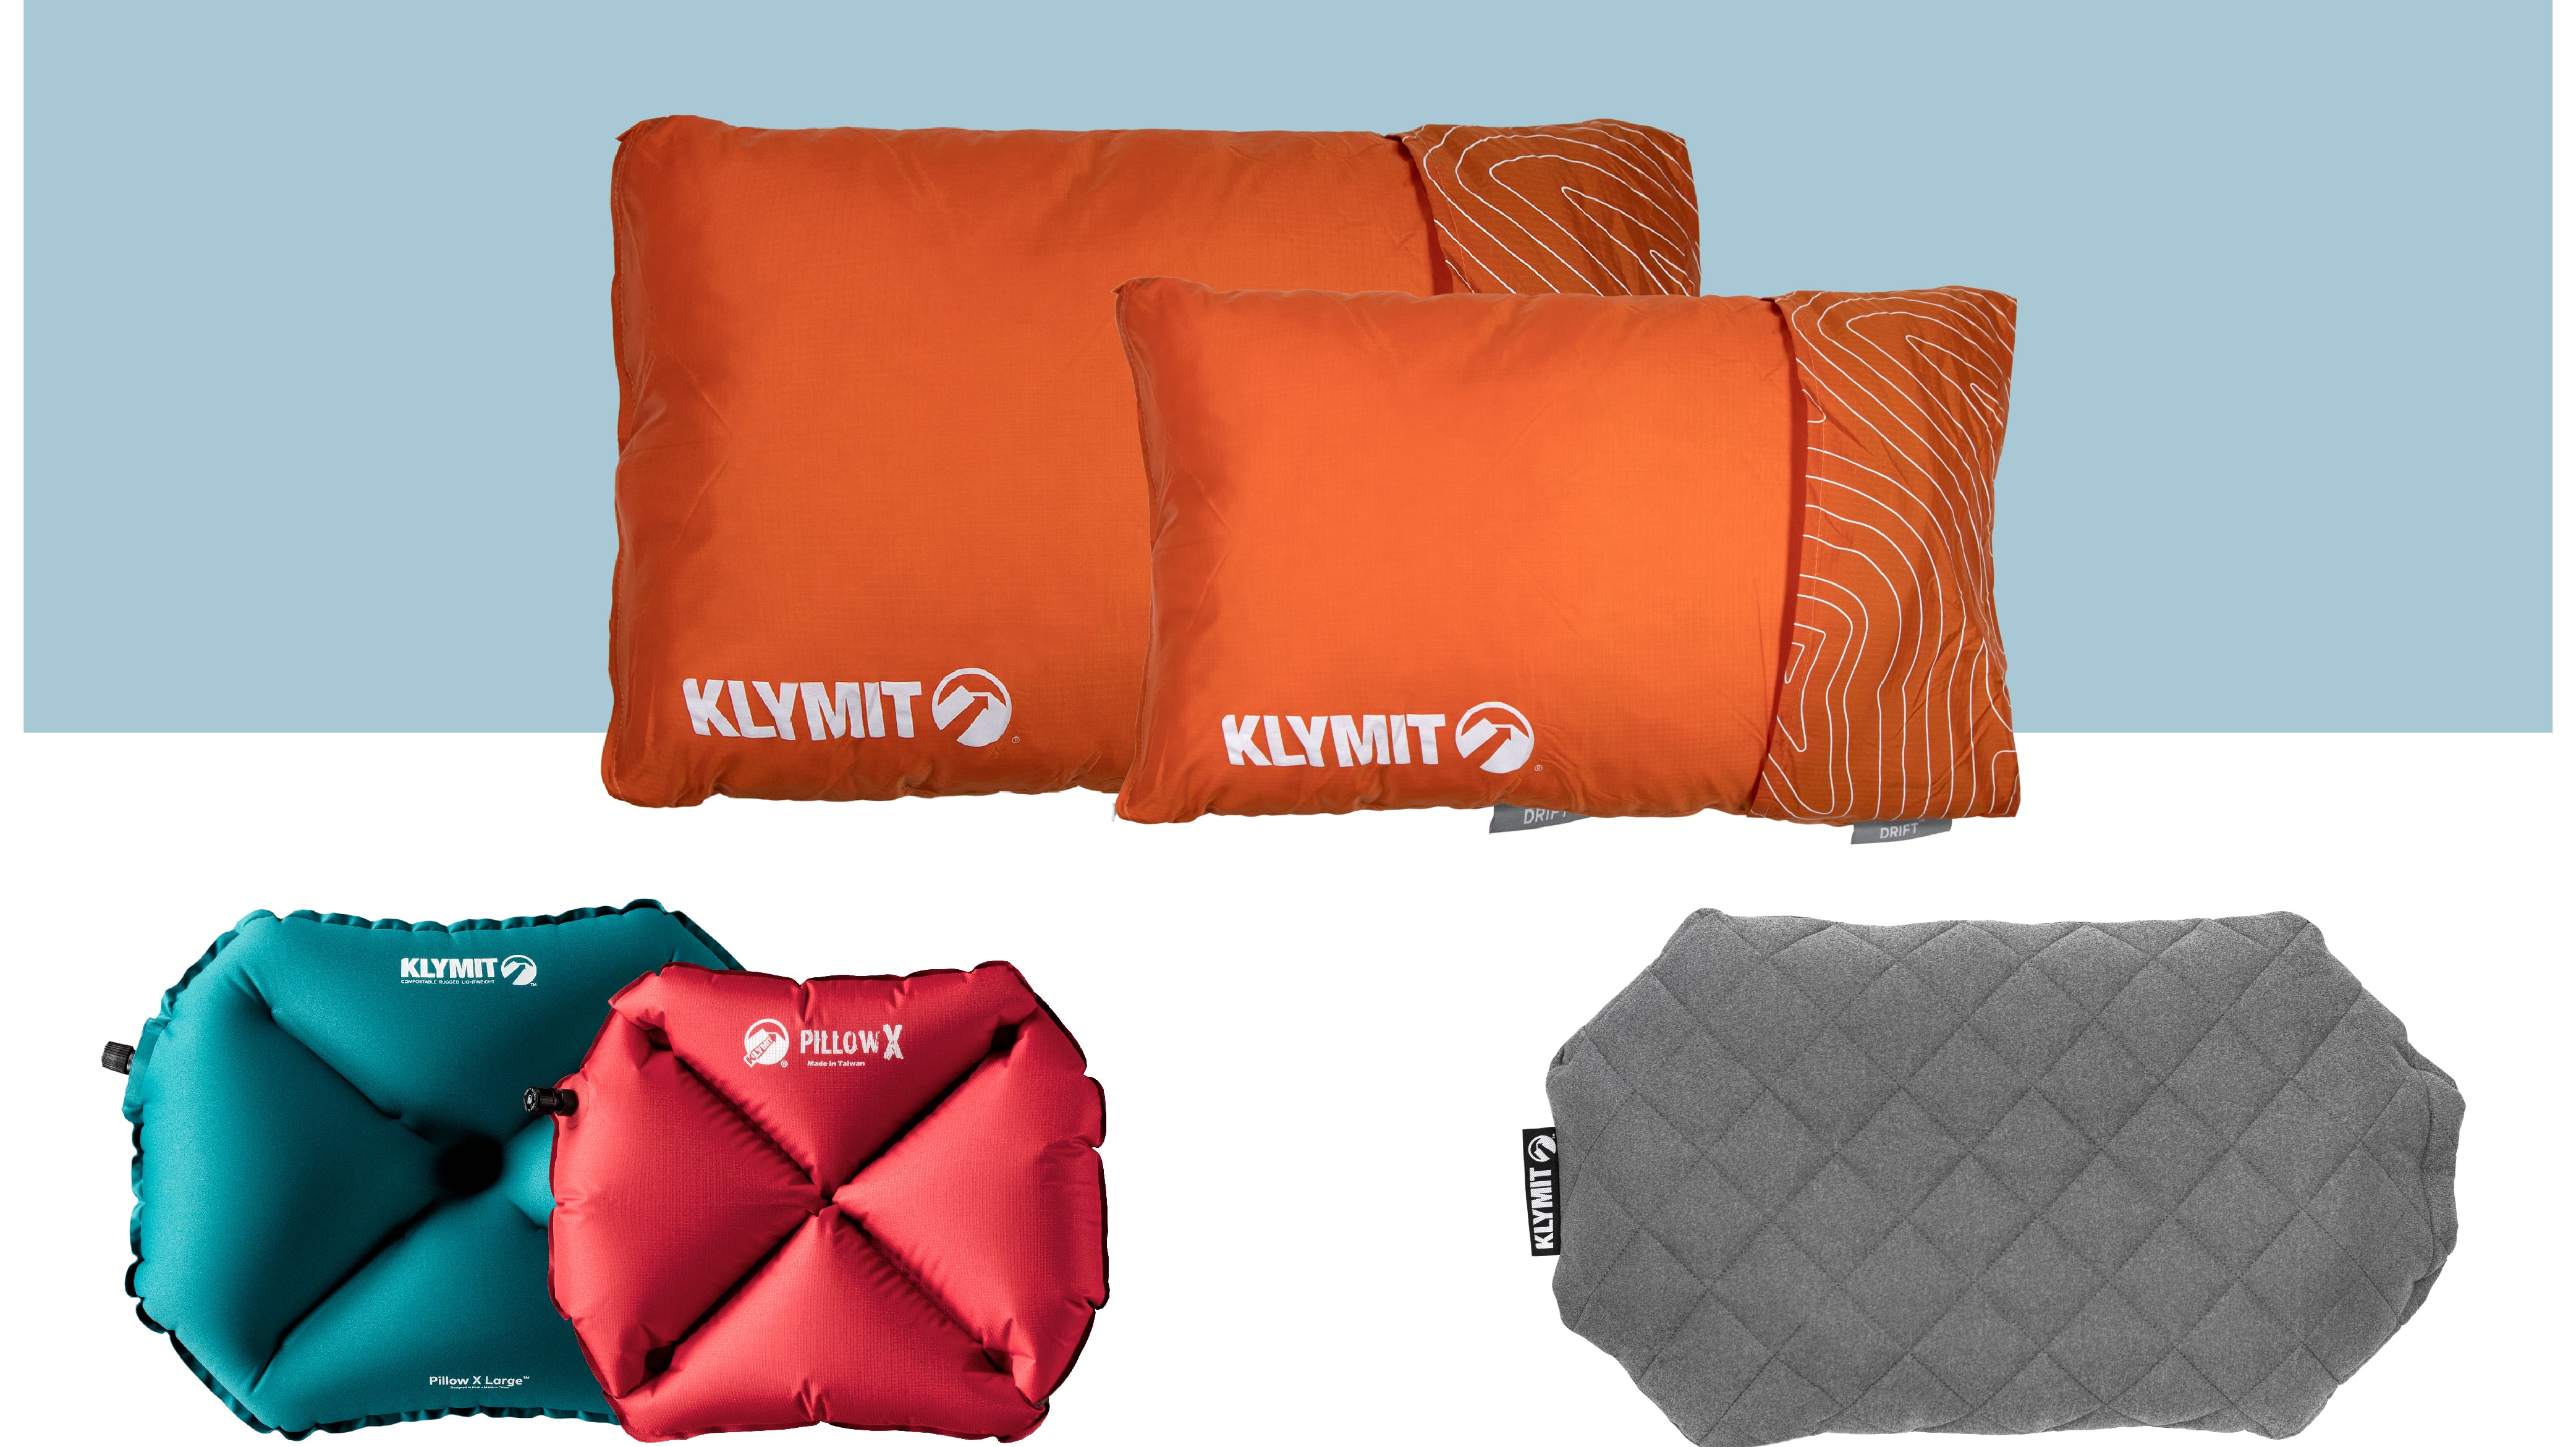 Guide to Klymit Pillows